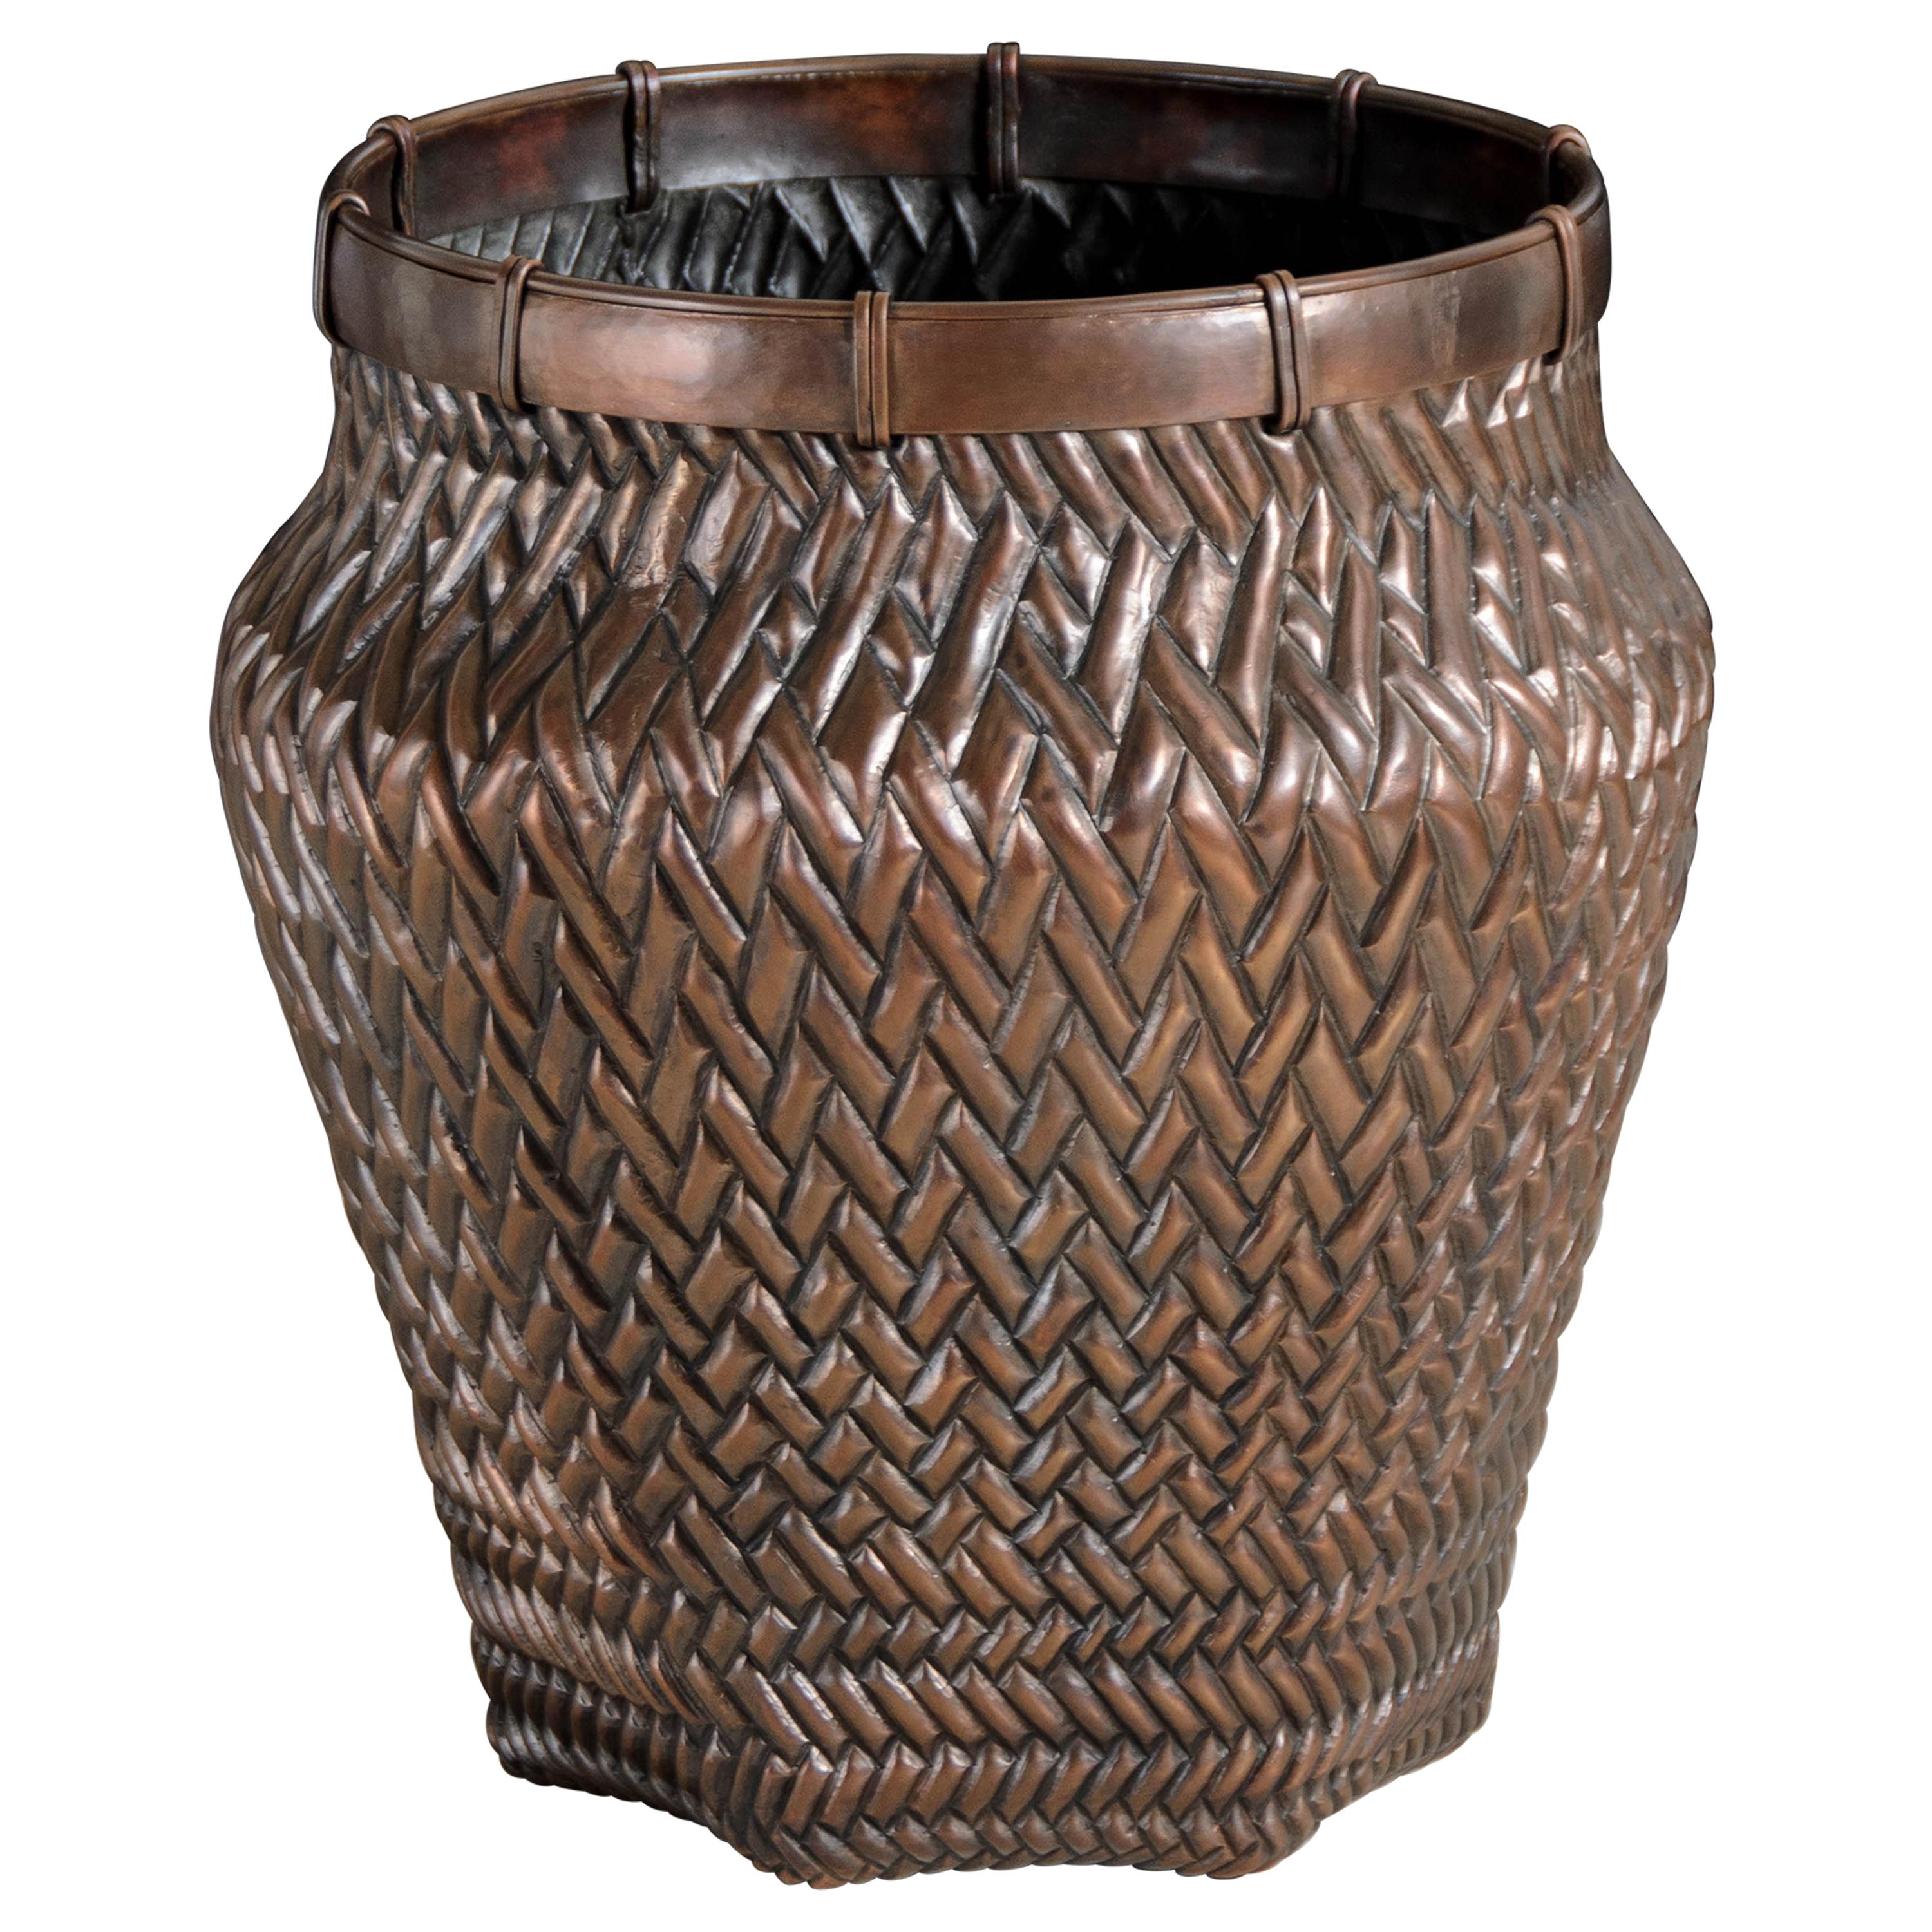 Contemporary Weave Design Vase in Copper by Robert Kuo, Limited Edition For Sale